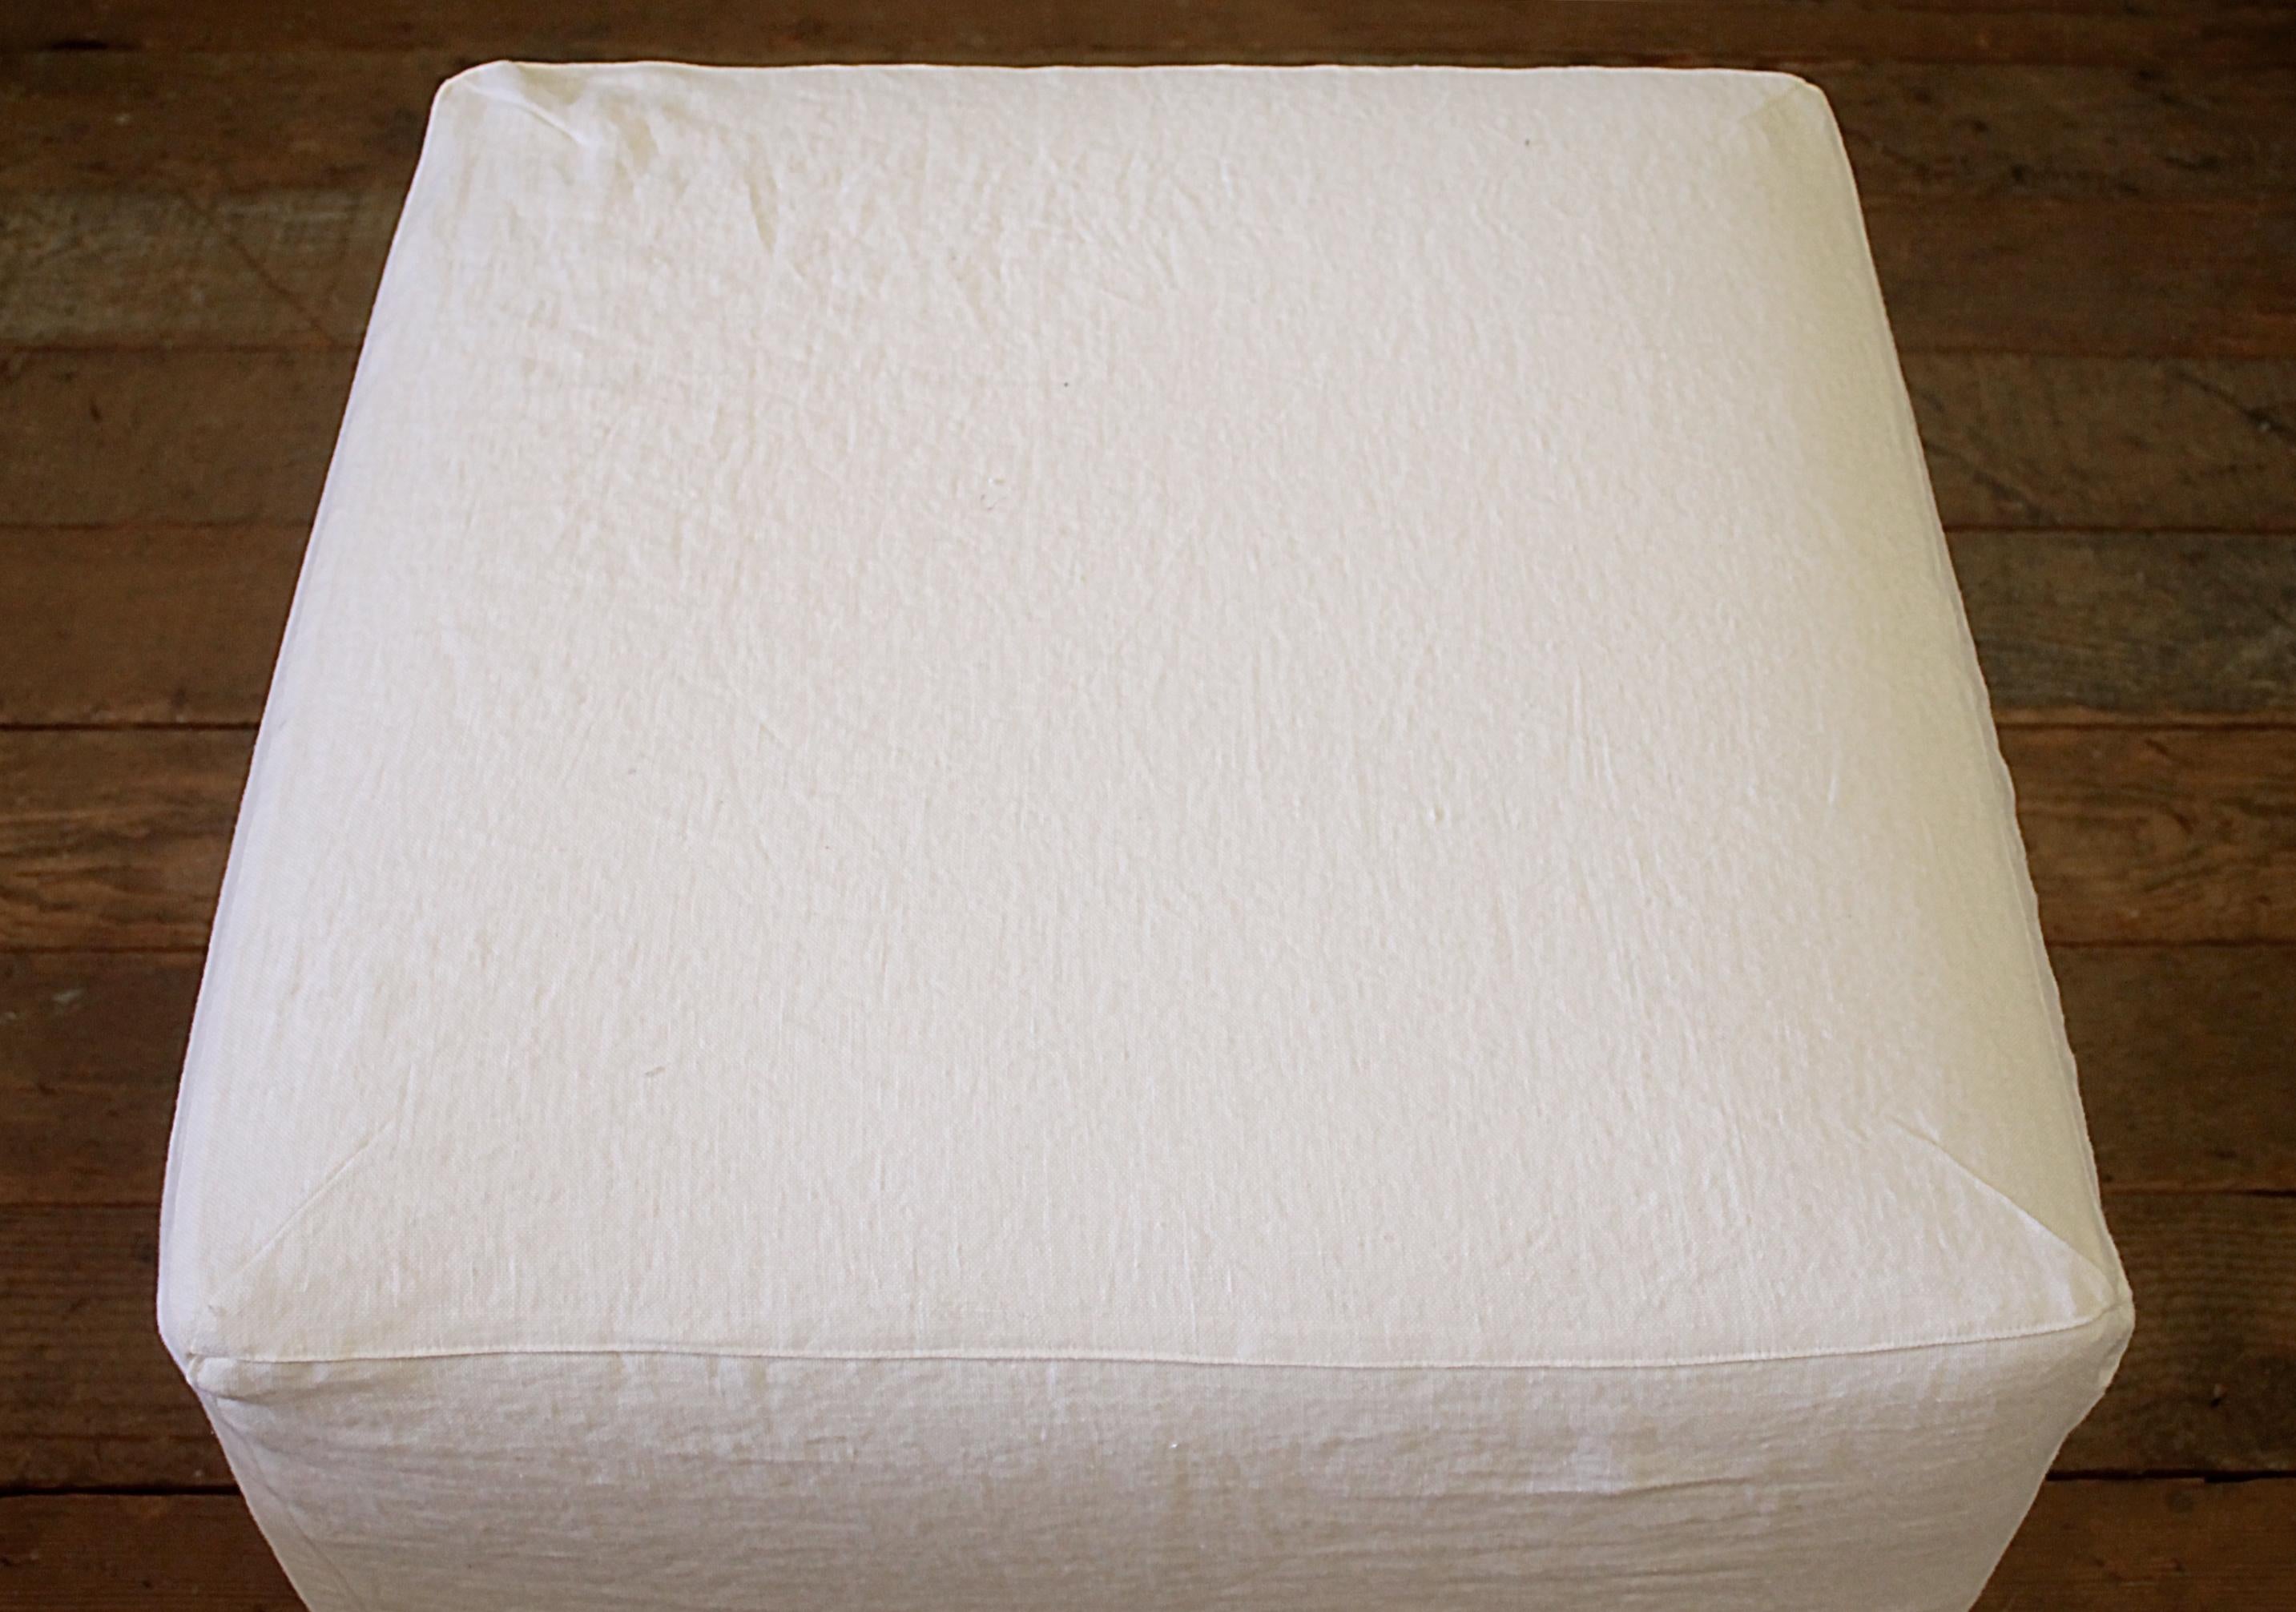 North American Custom Cube Ottoman Slip Covered in White Belgian Linen with Hand Pleated Ruffle